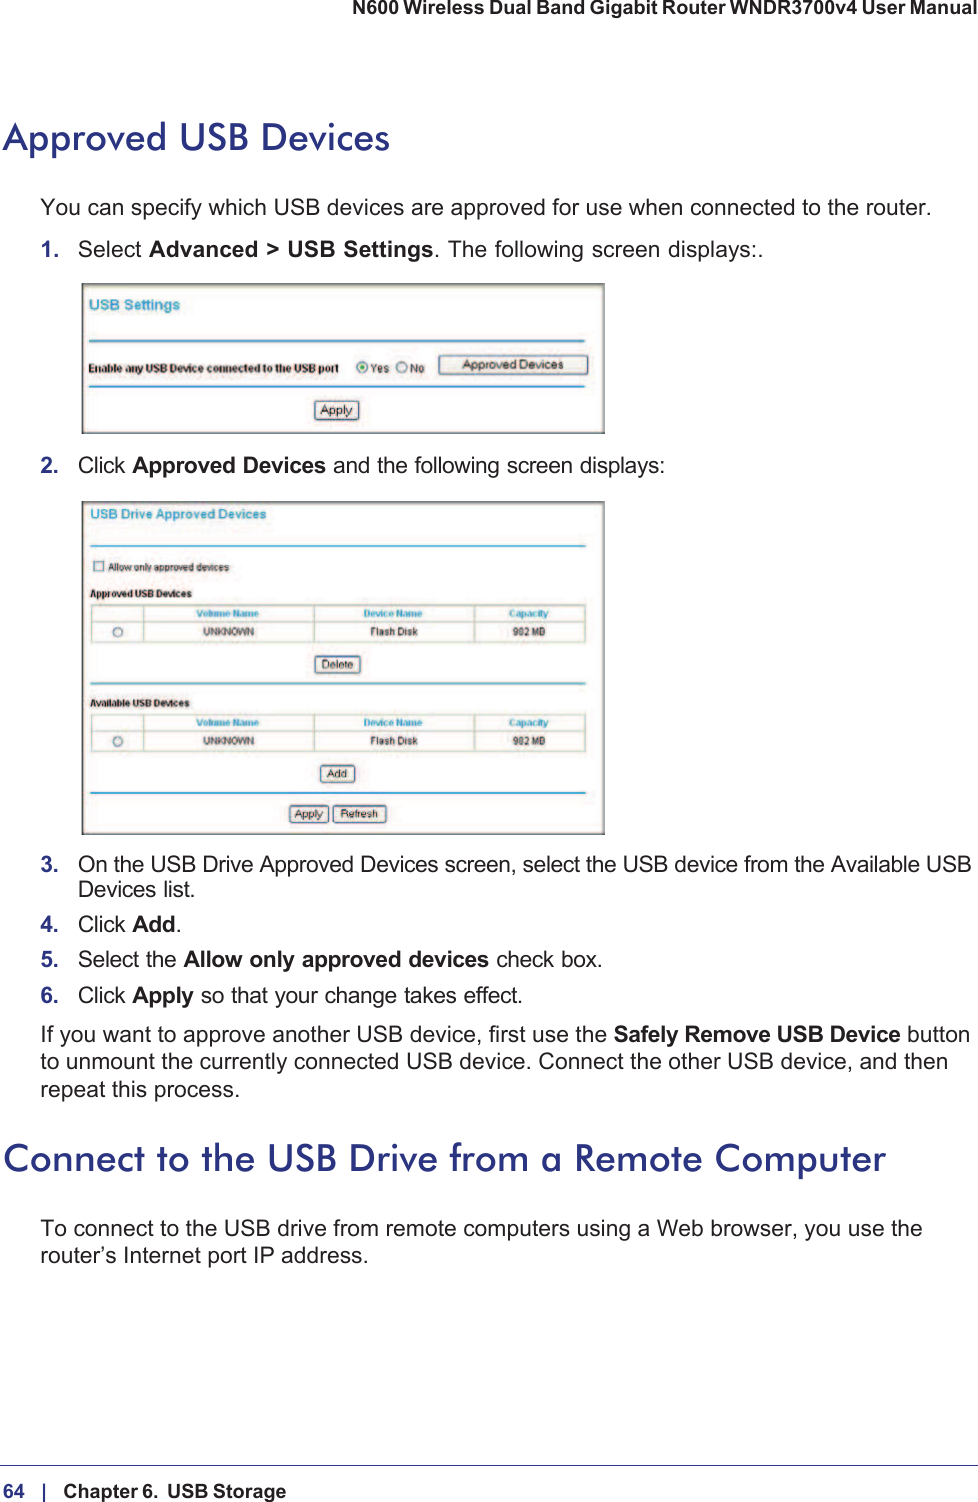 64 |    Chapter 6.  USB Storage N600 Wireless Dual Band Gigabit Router WNDR3700v4 User Manual Approved USB DevicesYou can specify which USB devices are approved for use when connected to the router.1. Select Advanced &gt; USB Settings. The following screen displays:. 2. Click Approved Devices and the following screen displays: 3. On the USB Drive Approved Devices screen, select the USB device from the Available USB Devices list.4. Click Add.5. Select the Allow only approved devices check box.6. Click Apply so that your change takes effect.If you want to approve another USB device, first use the Safely Remove USB Device button to unmount the currently connected USB device. Connect the other USB device, and then repeat this process.Connect to the USB Drive from a Remote ComputerTo connect to the USB drive from remote computers using a Web browser, you use the router’s Internet port IP address.